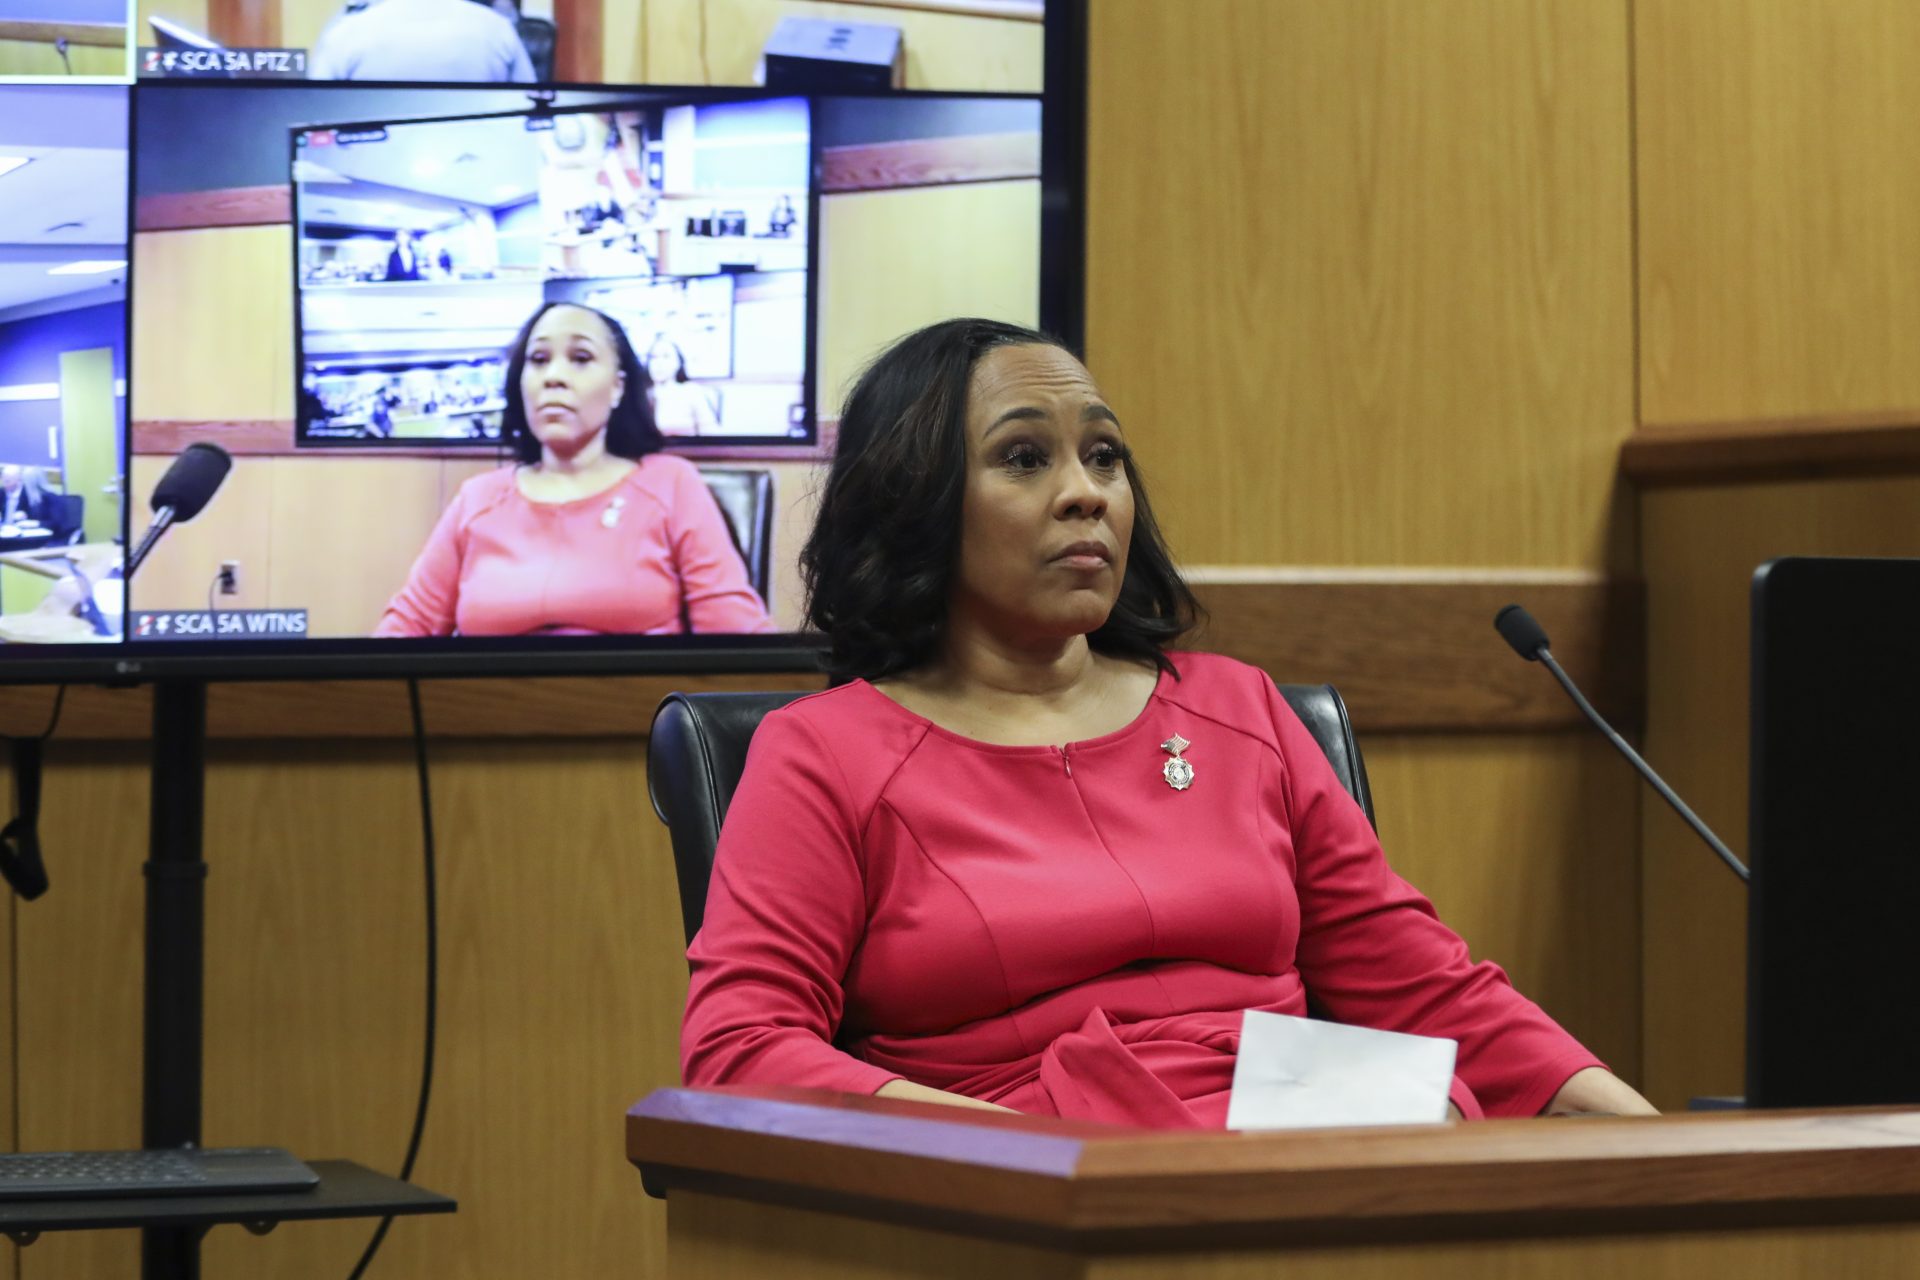 ATLANTA, GA - FEBRUARY 15: Fulton County District Attorney Fani Willis takes the stand as a witness during a hearing in the case of the State of Georgia v. Donald John Trump at the Fulton County Courthouse on February 15, 2024 in Atlanta, Georgia. Judge Scott McAfee is hearing testimony as to whether Willis and Special Prosecutor Nathan Wade should be disqualified from the case for allegedly lying about a personal relationship.